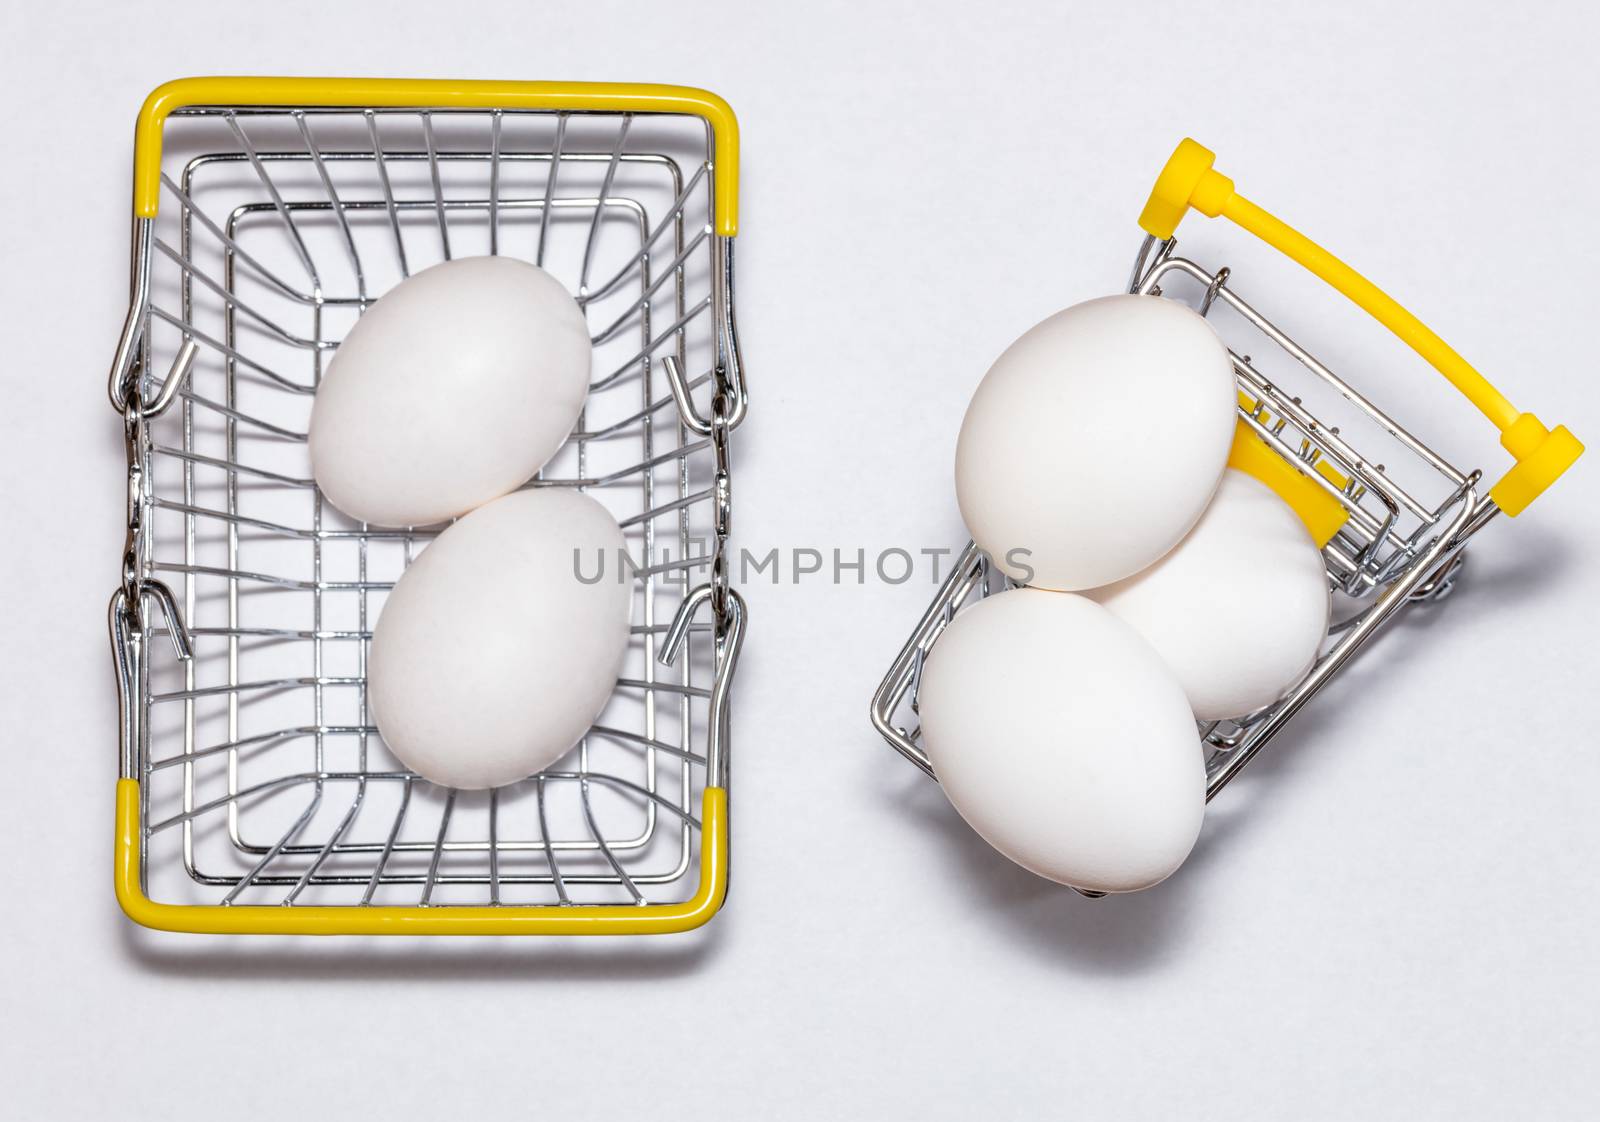 Fresh eggs in a shopping cart and a basket next to it. Top view. Shopping, purchasing, and food delivery concept. by DamantisZ